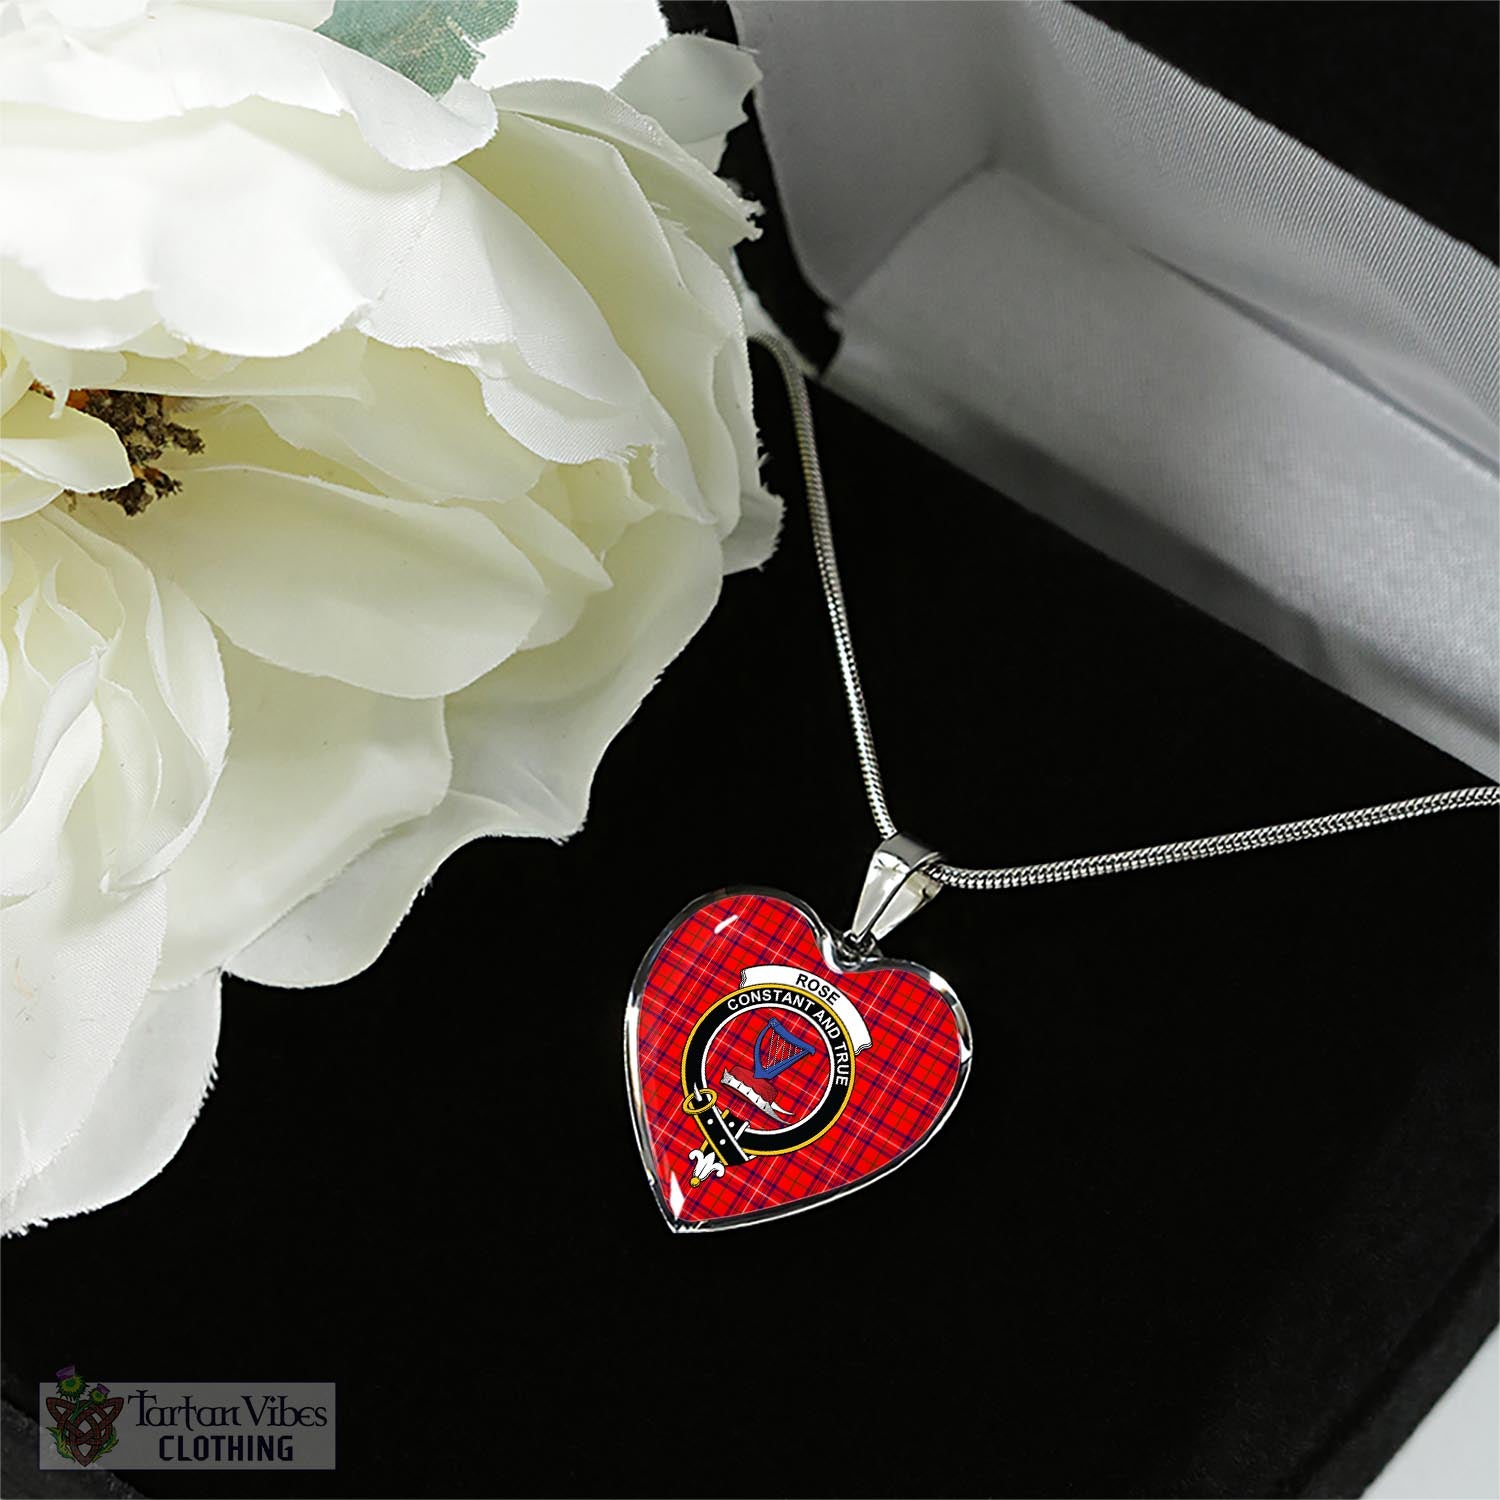 Tartan Vibes Clothing Rose Modern Tartan Heart Necklace with Family Crest